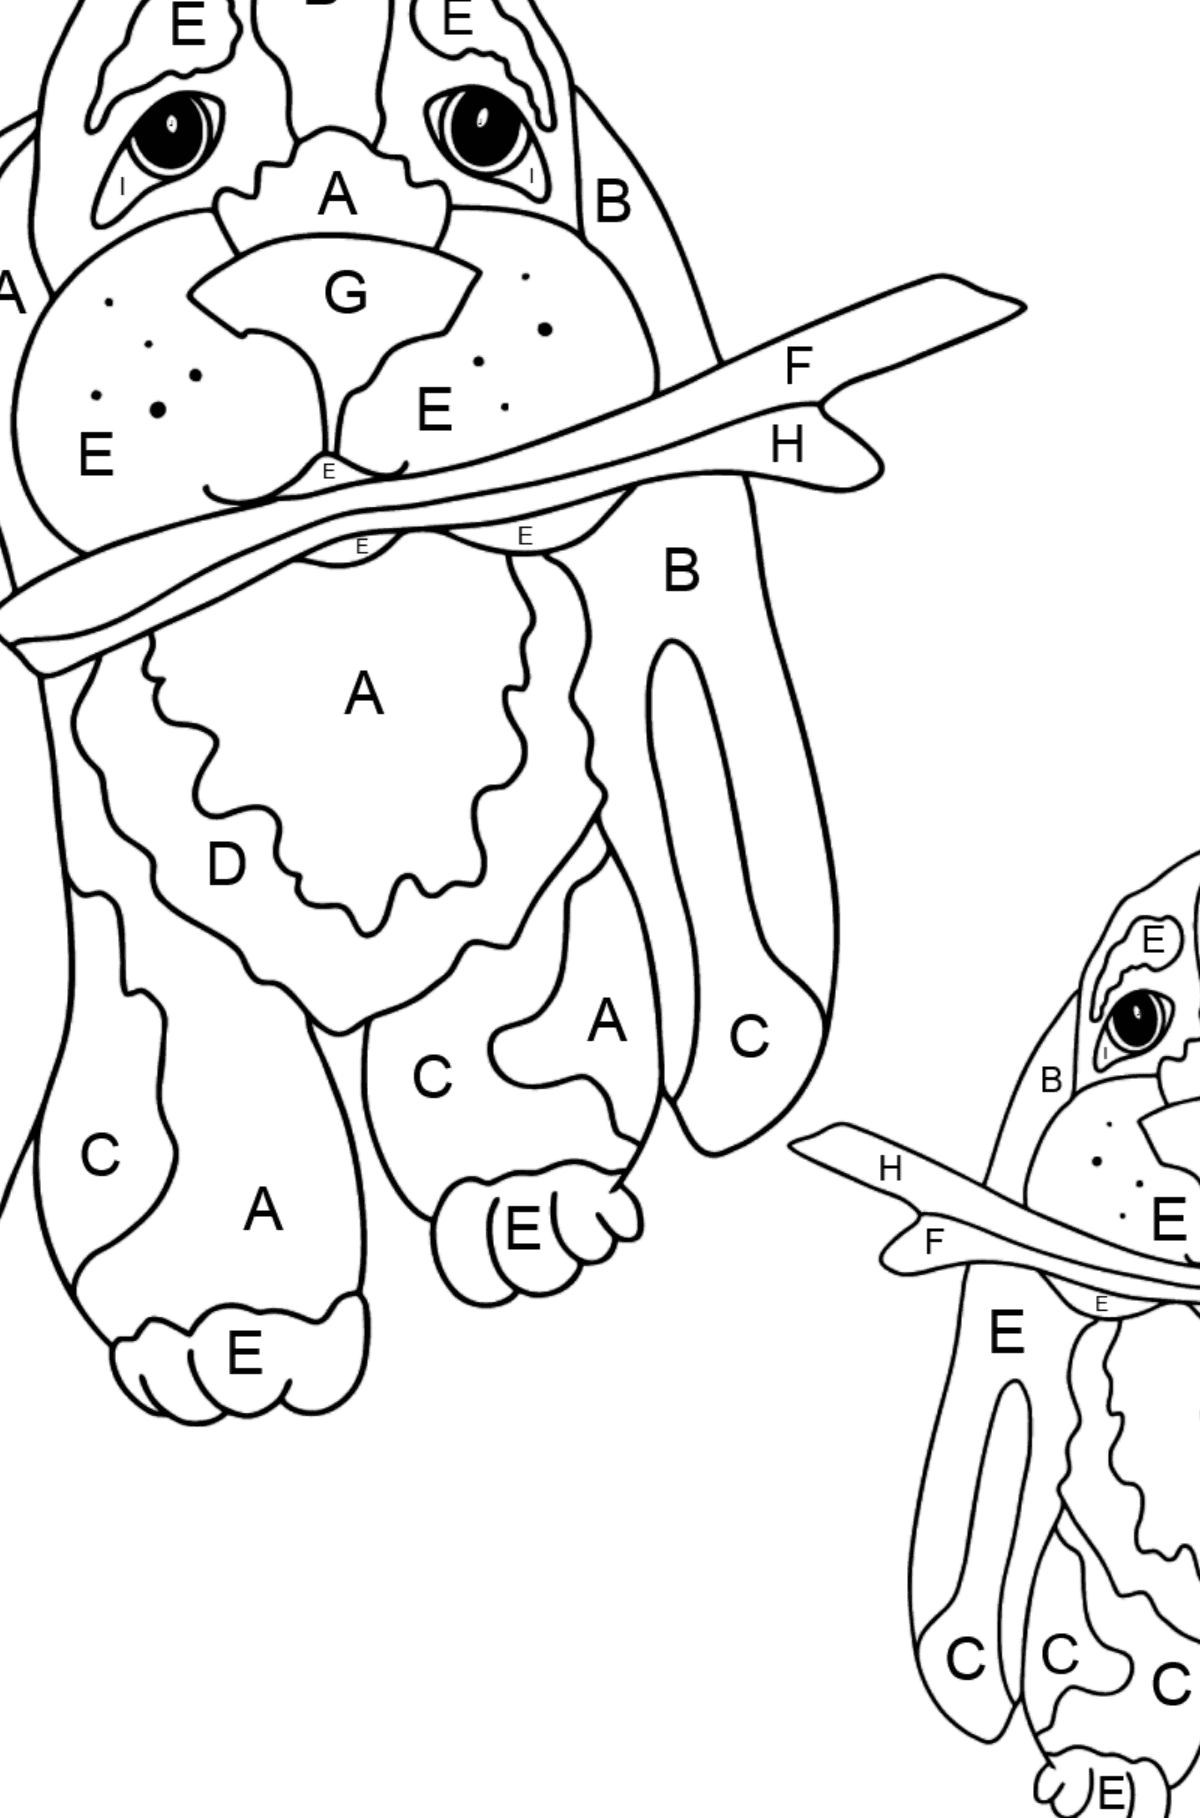 Coloring Page - Two Dogs are Playing with Sticks - Coloring by Letters for Kids